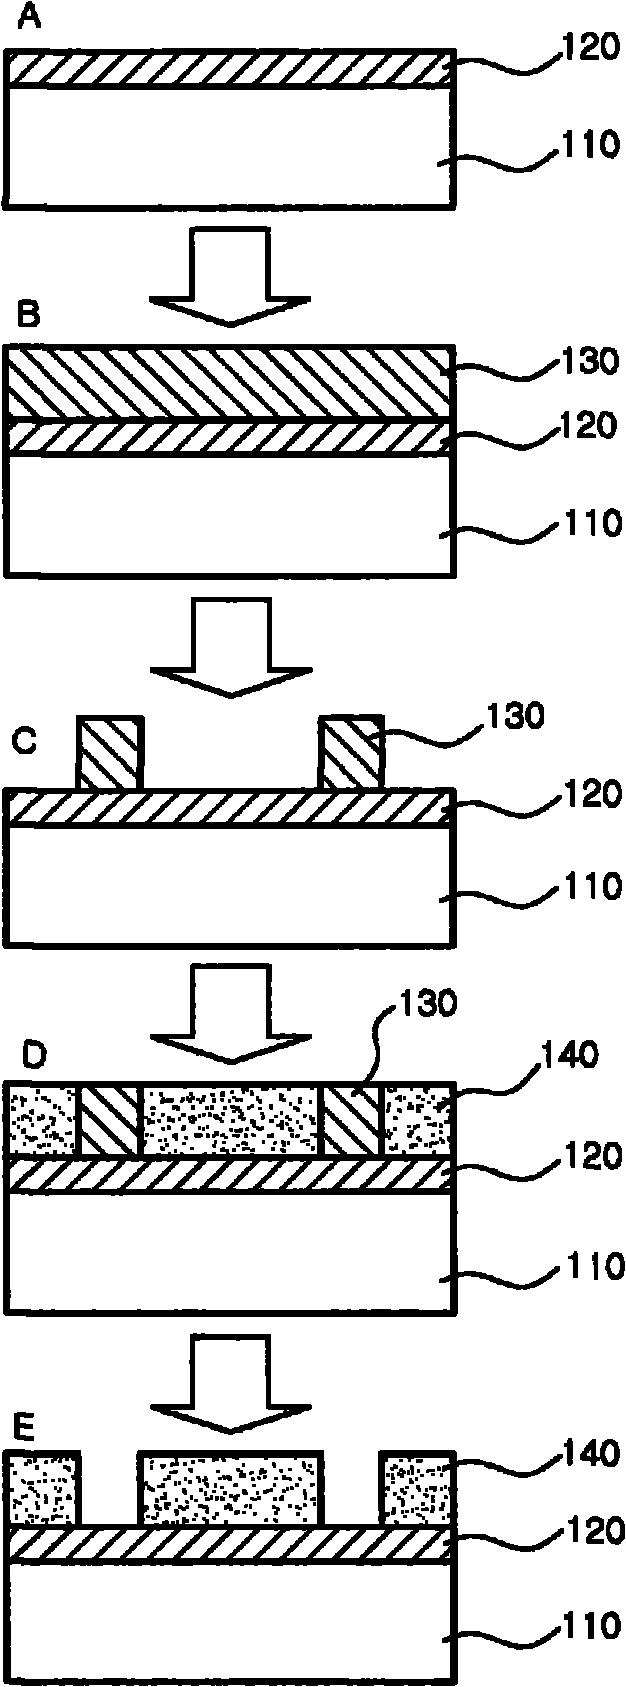 Method of manufacturing gravure plates for offset printing